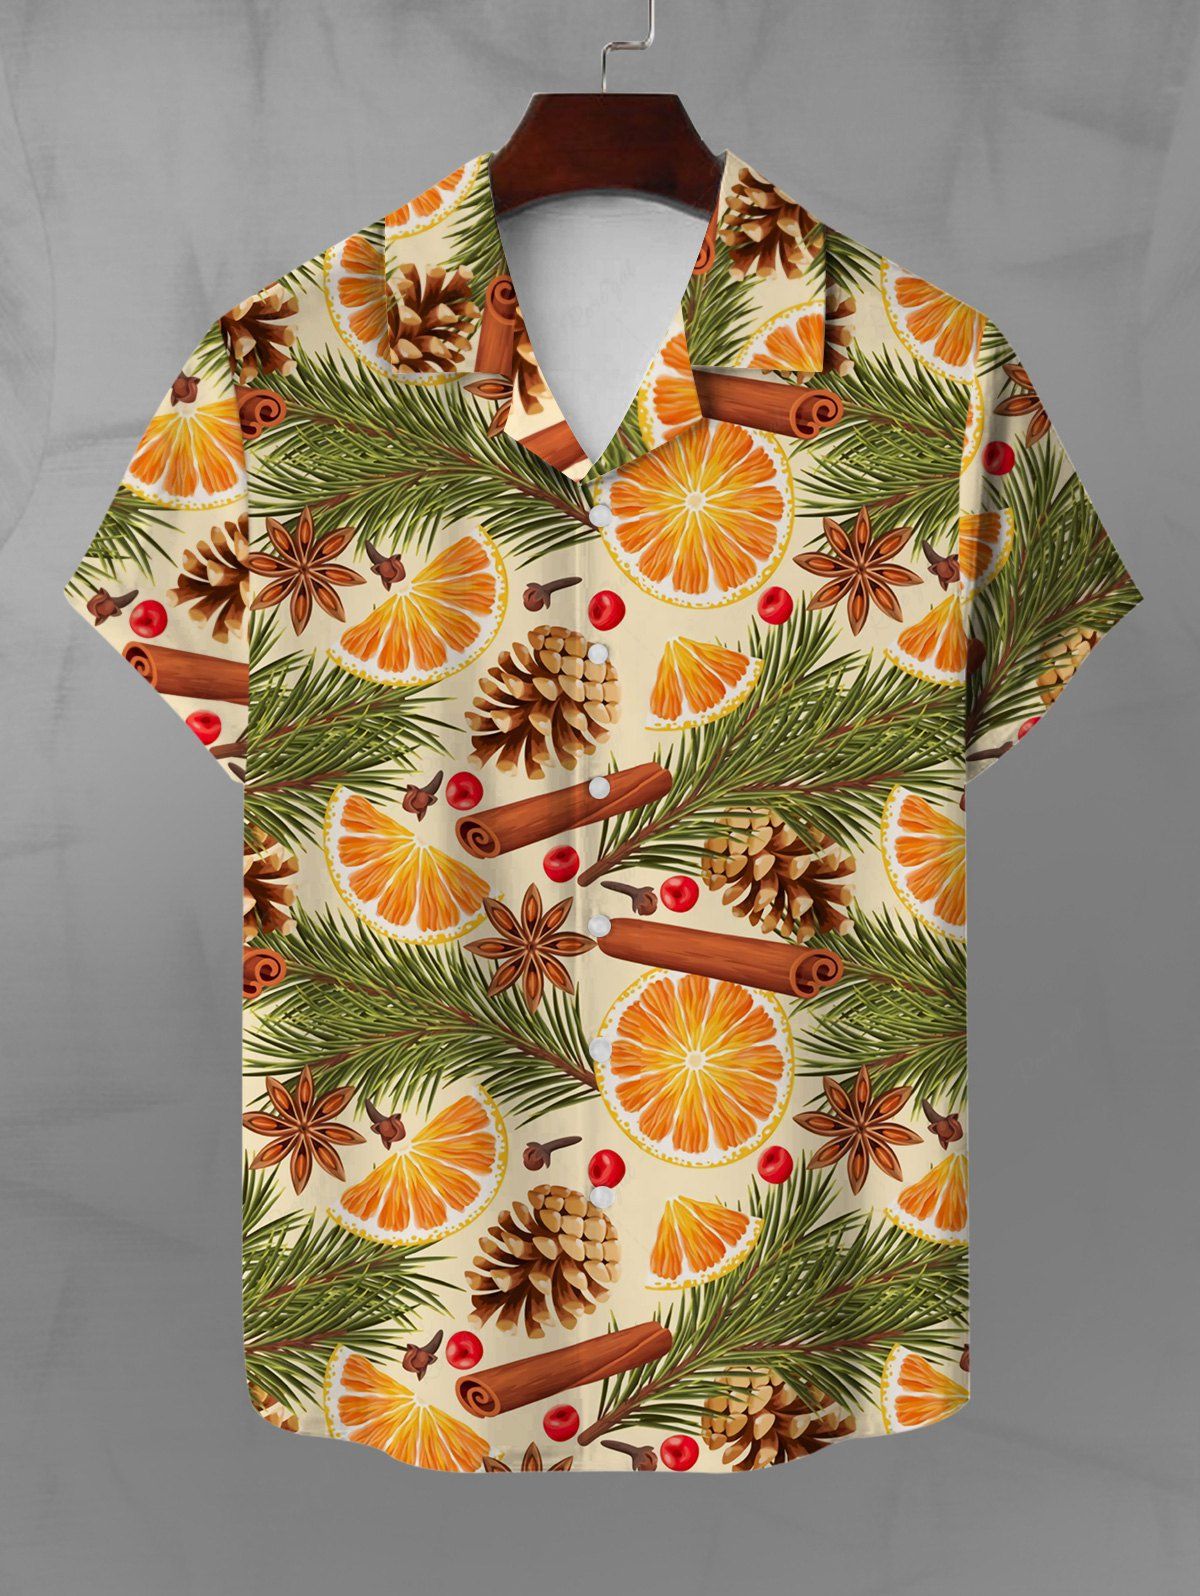 Hot Hawaii Plus Size Vacation Style Orange Fruit Pine Nuts Needles Cinnamon Print Buttons Beach Shirt For Men  